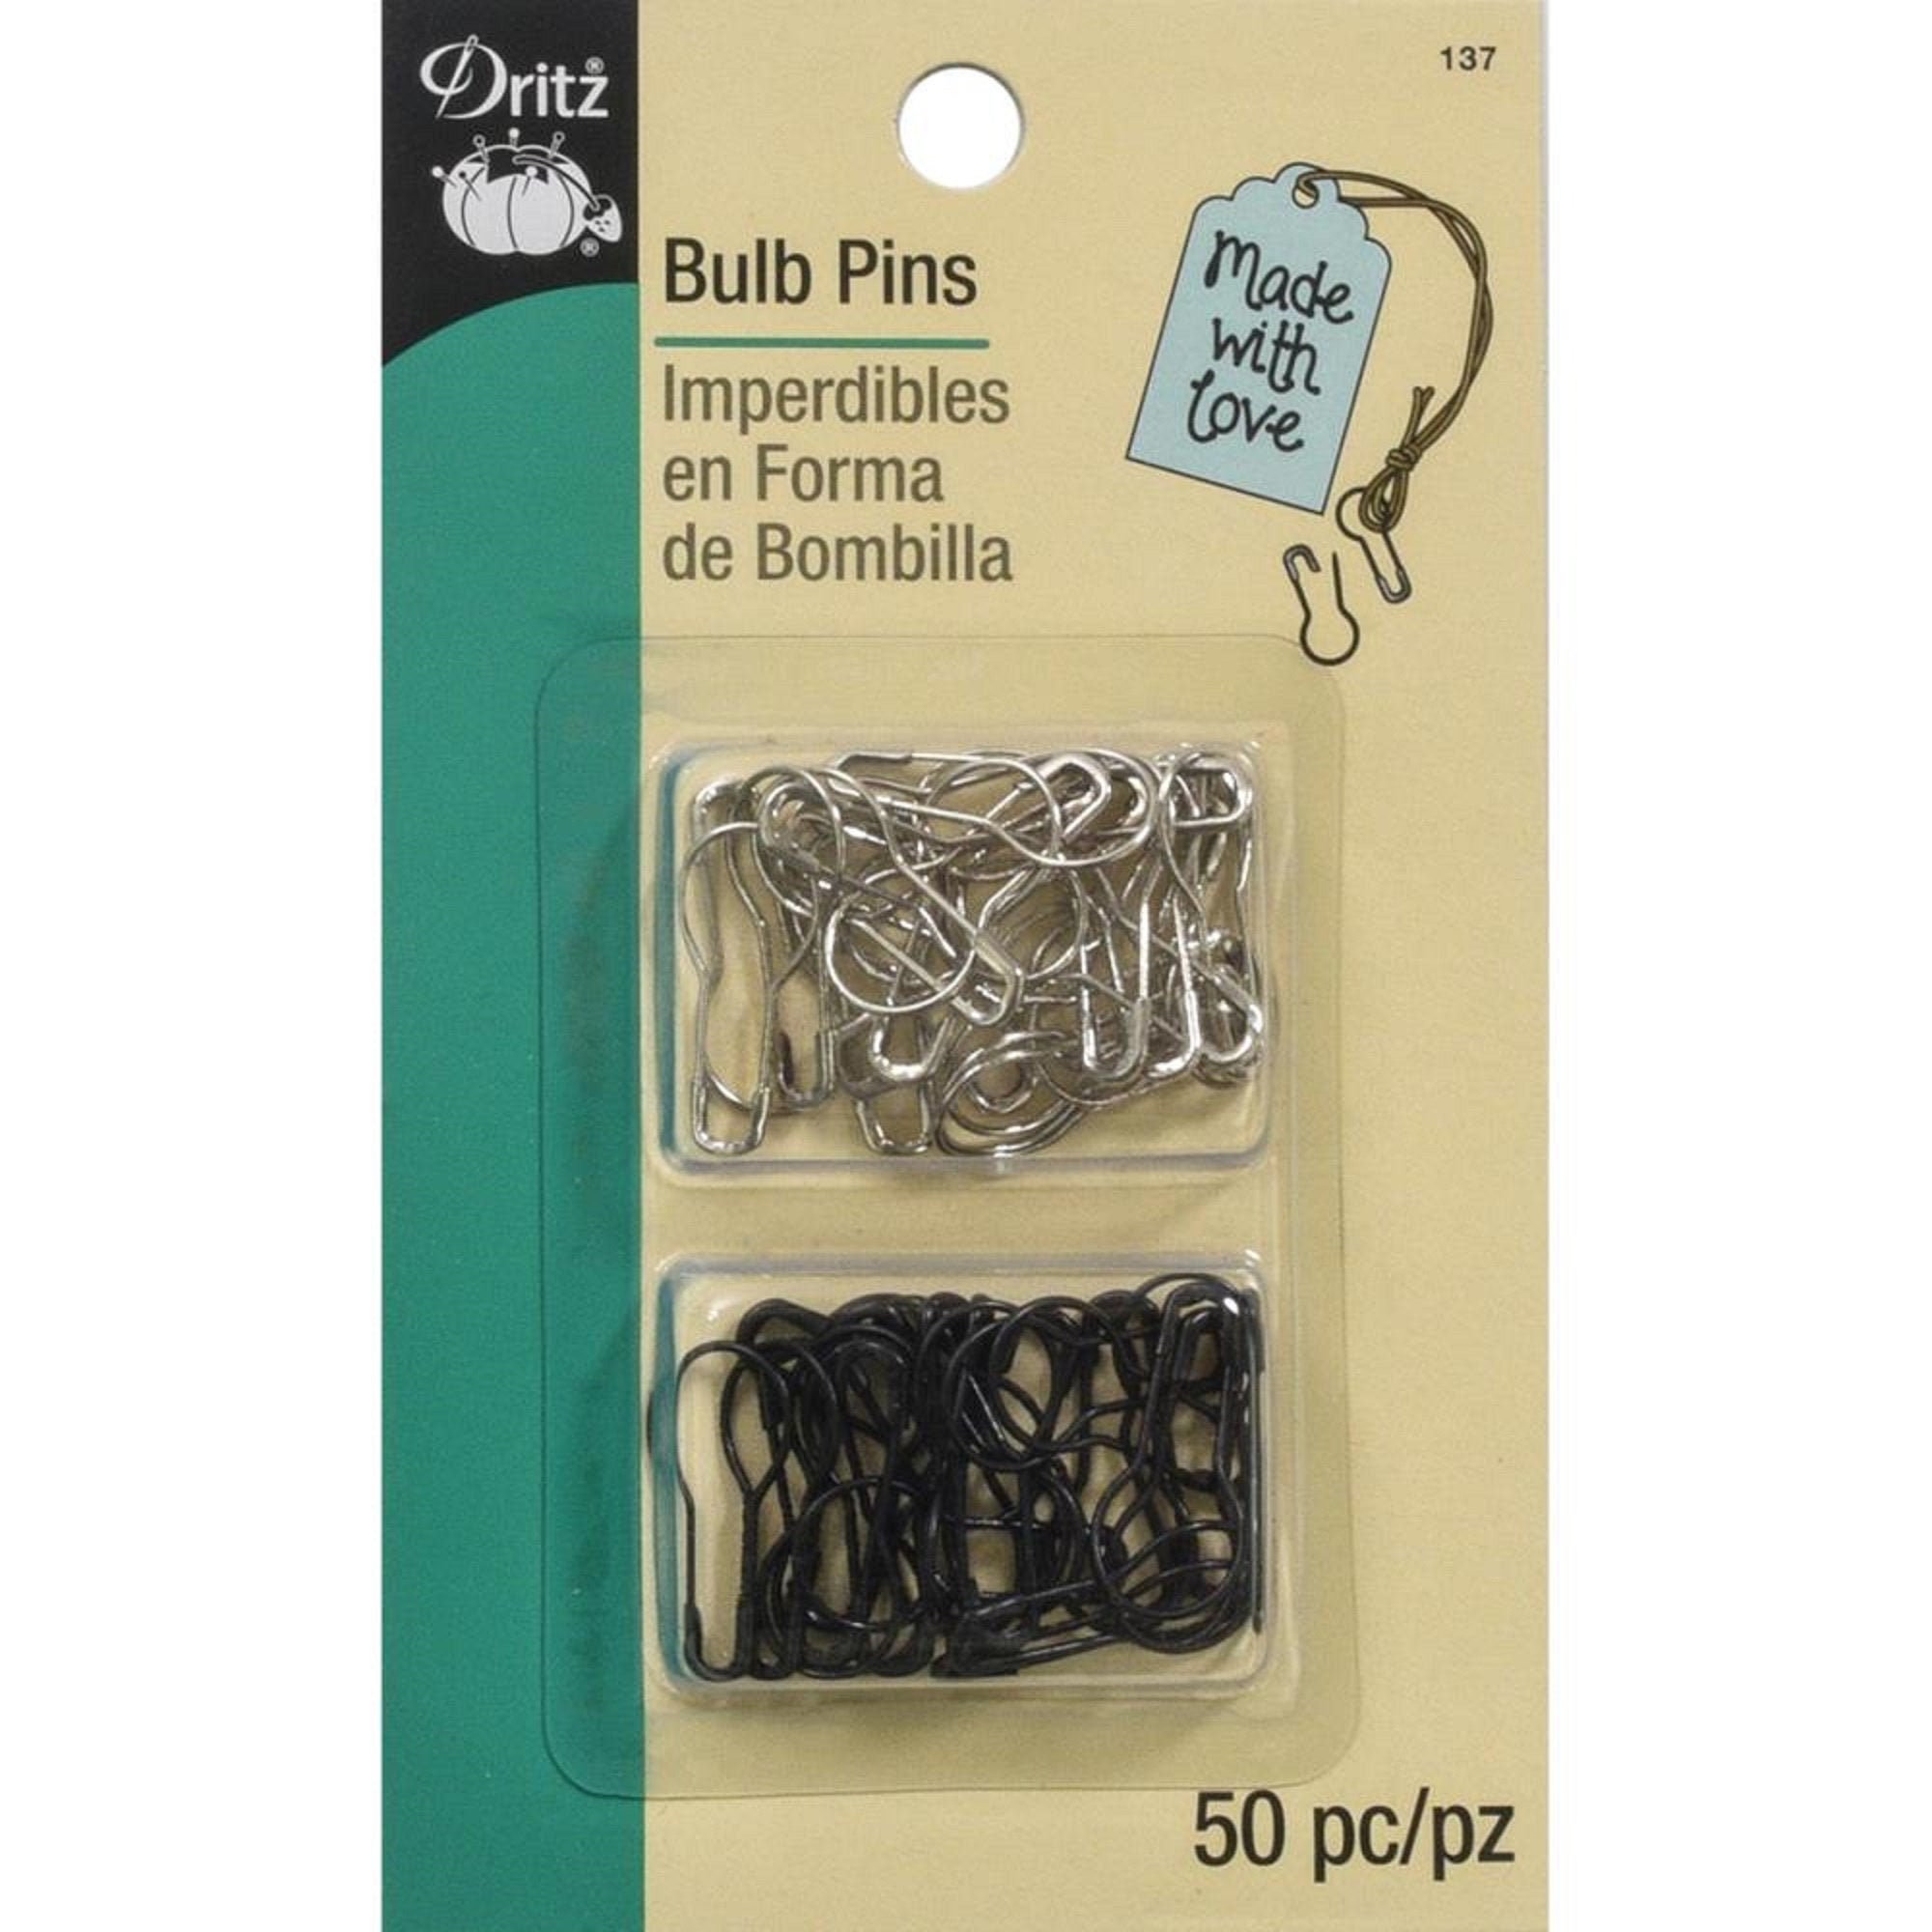 100 Nickel Bulb Pins for Knitting and Crochet